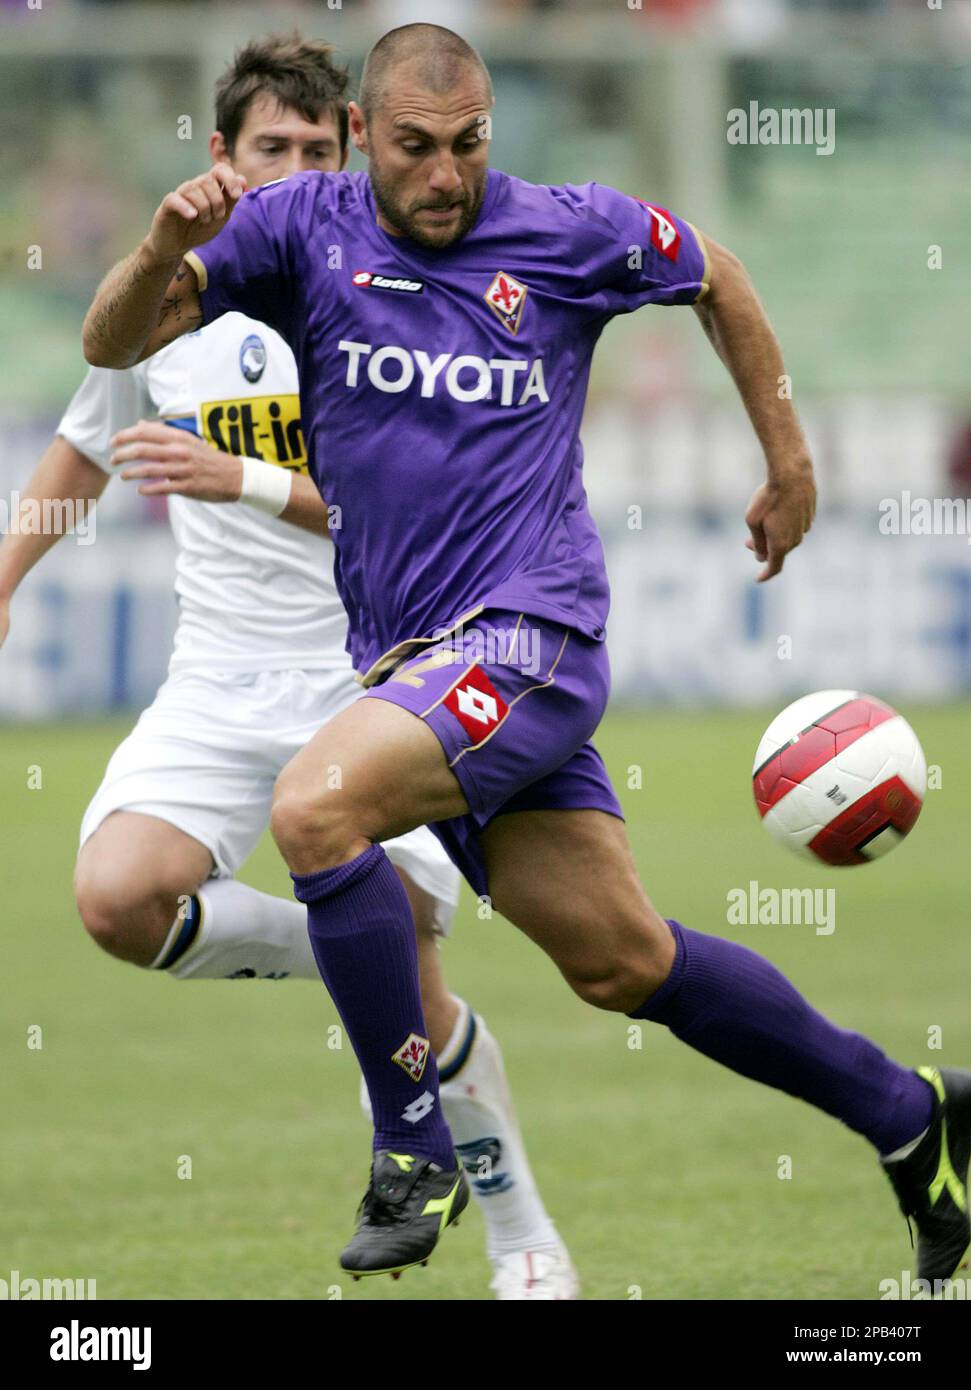 Fiorentina's forward Christian Vieri in action during the Italian Serie A  first division soccer league match between Fiorentina and Atalanta at  Florence's Artemio Franchi stadium, Italy, Sunday, Sept. 16, 2007. The match